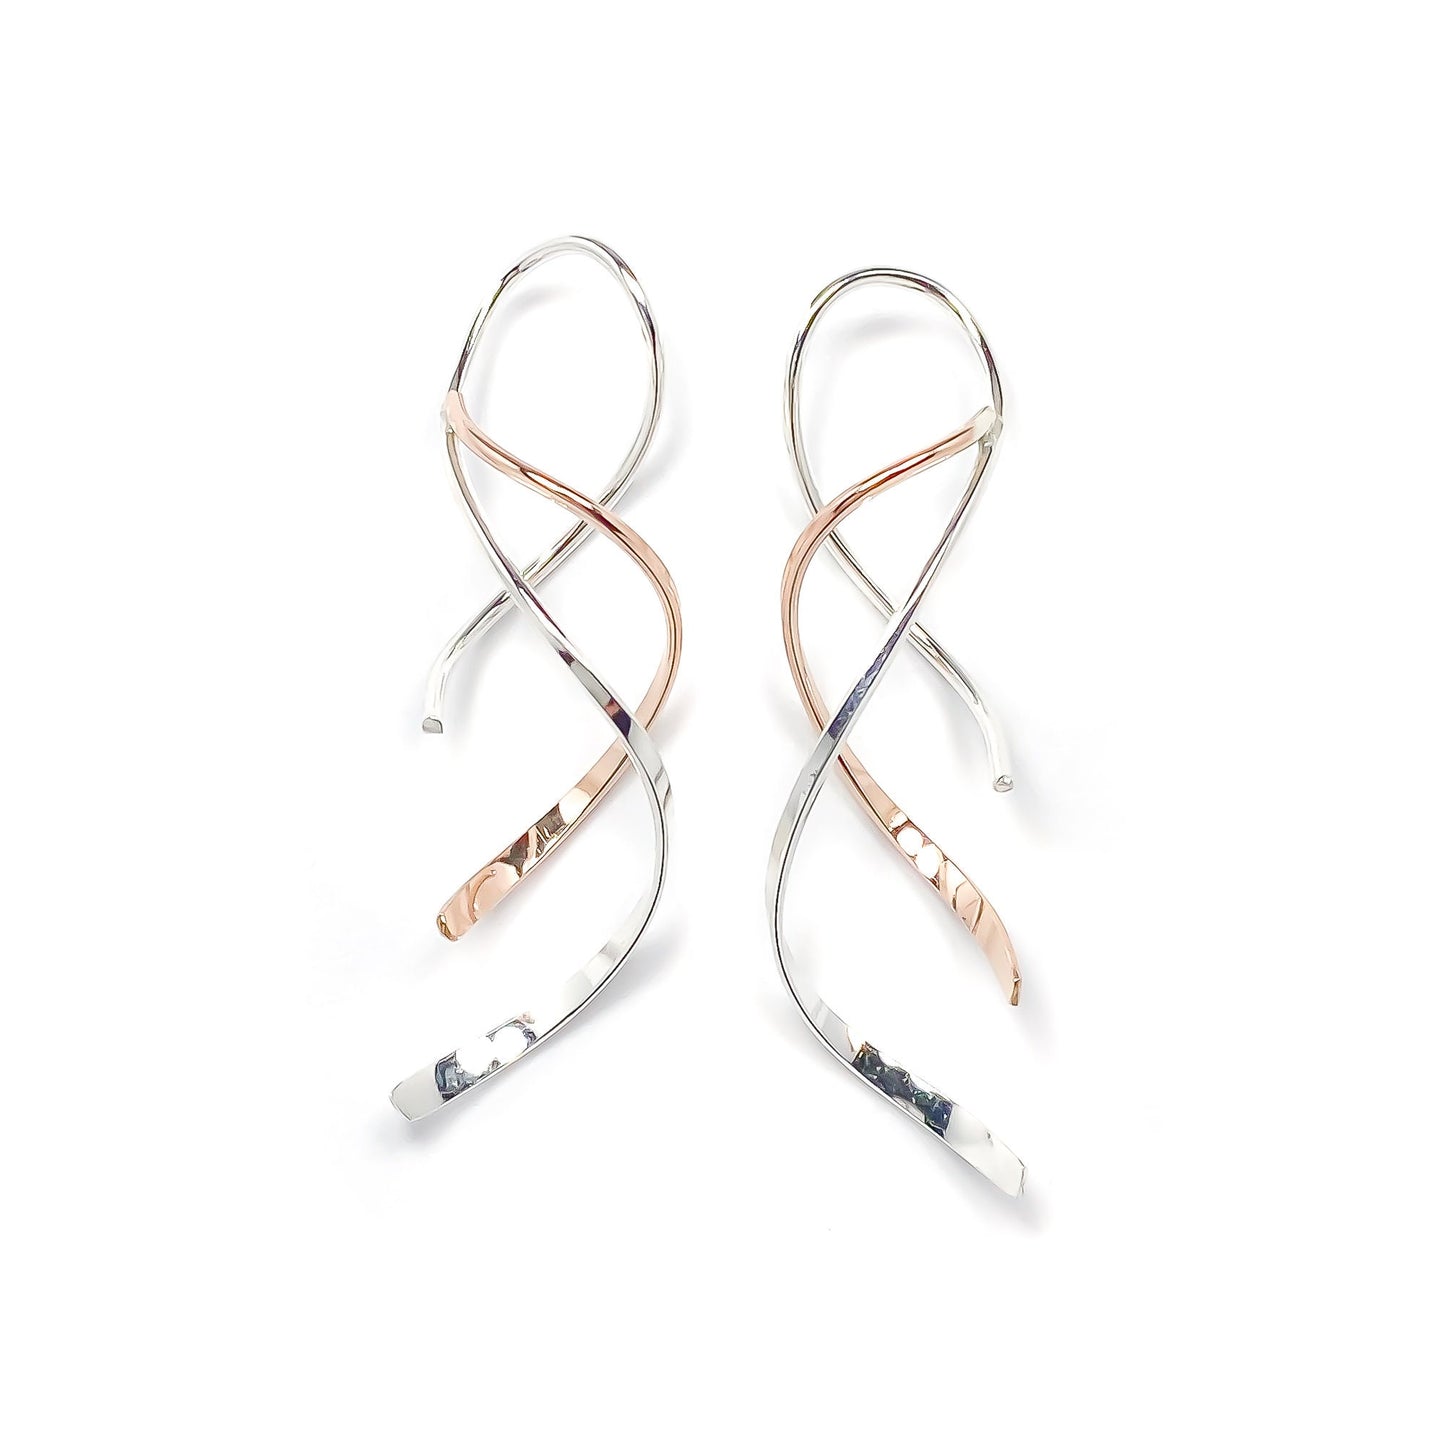 Rose Gold & Silver Mix Double Spiral Earrings